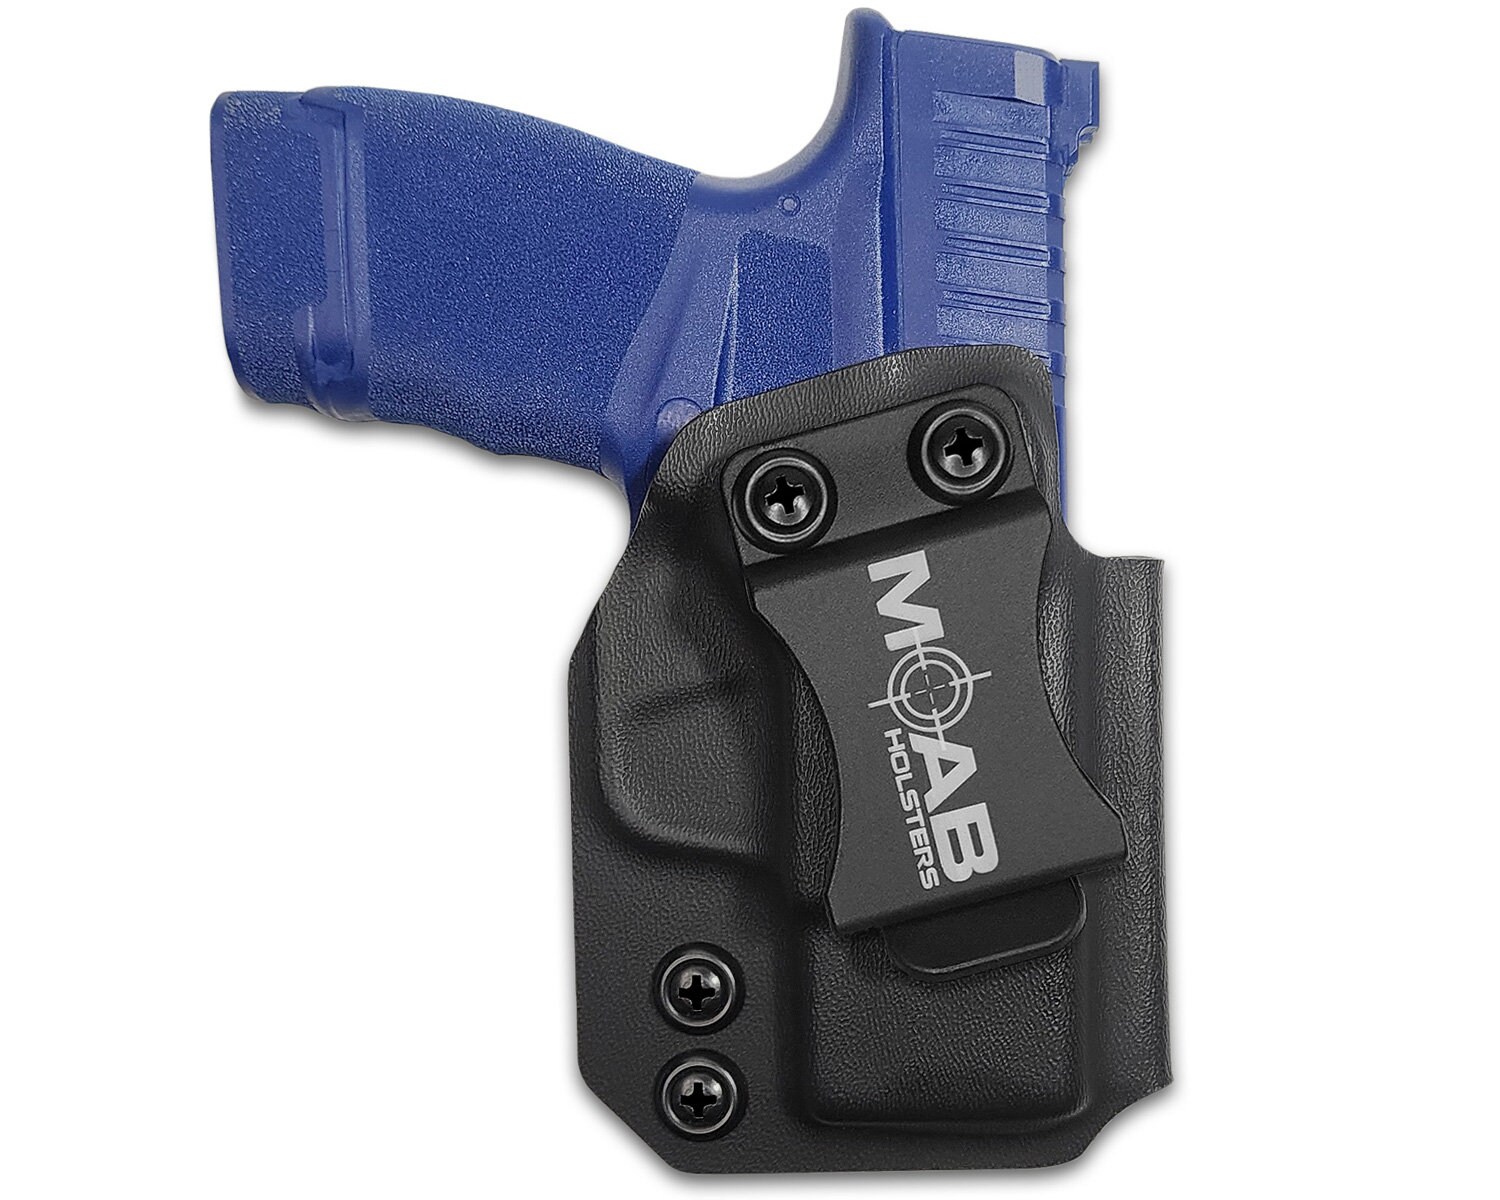  Kydex Holster Belt FOMI Quick Clips for IWB/OWB Sheath/Gun  Holster Making with Replacement Hardware 1.5 or 1.75- Slotted Binding  Posts/Chicago Screws. Made in USA (1.5 2-Pack) : Sports & Outdoors